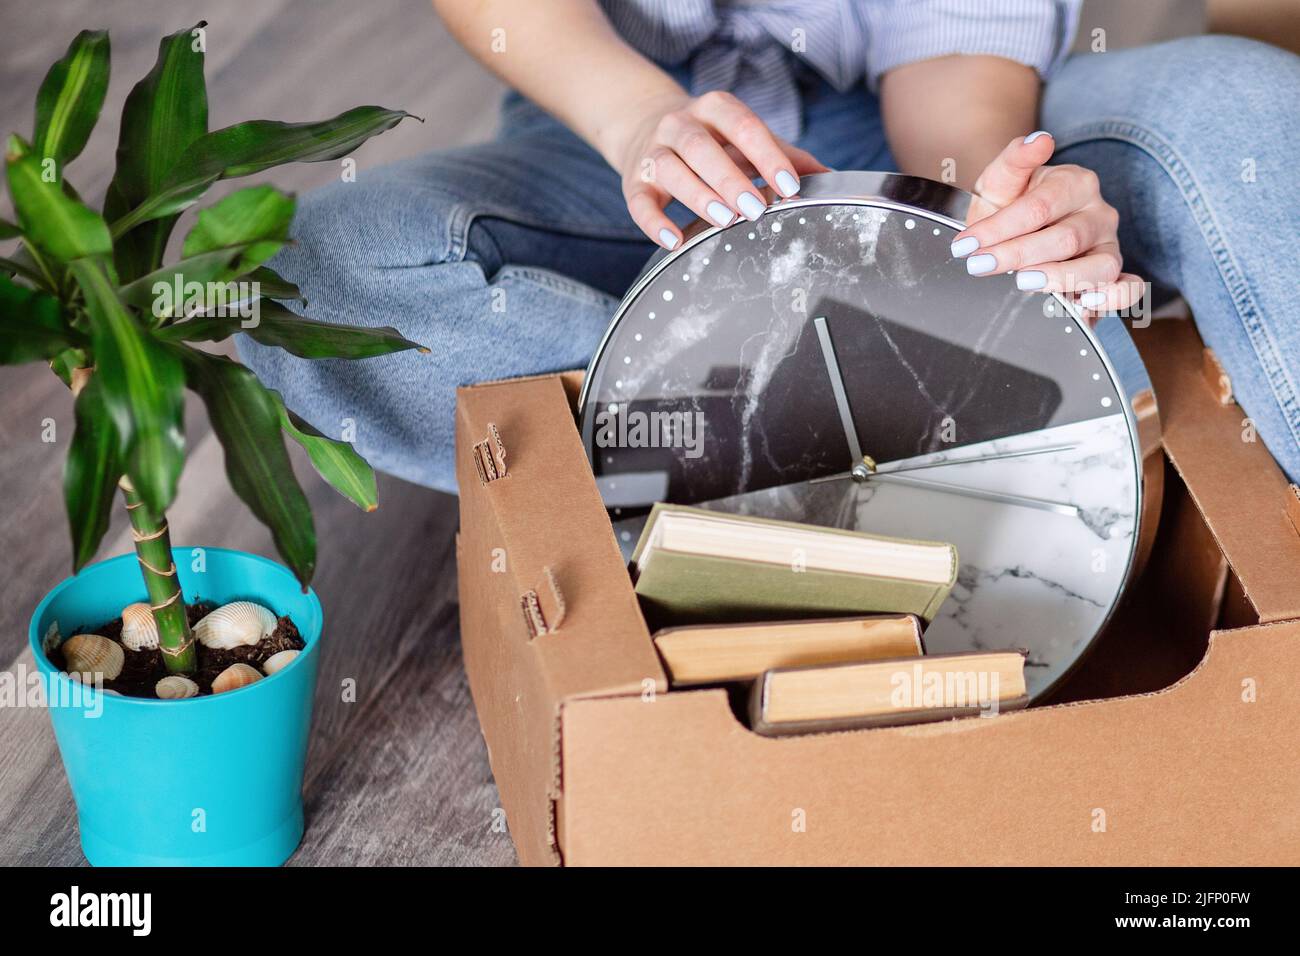 A woman takes things out of a cardboard box after moving. Hands takes out watches, books. Cleaning of things and order in the house. Stock Photo